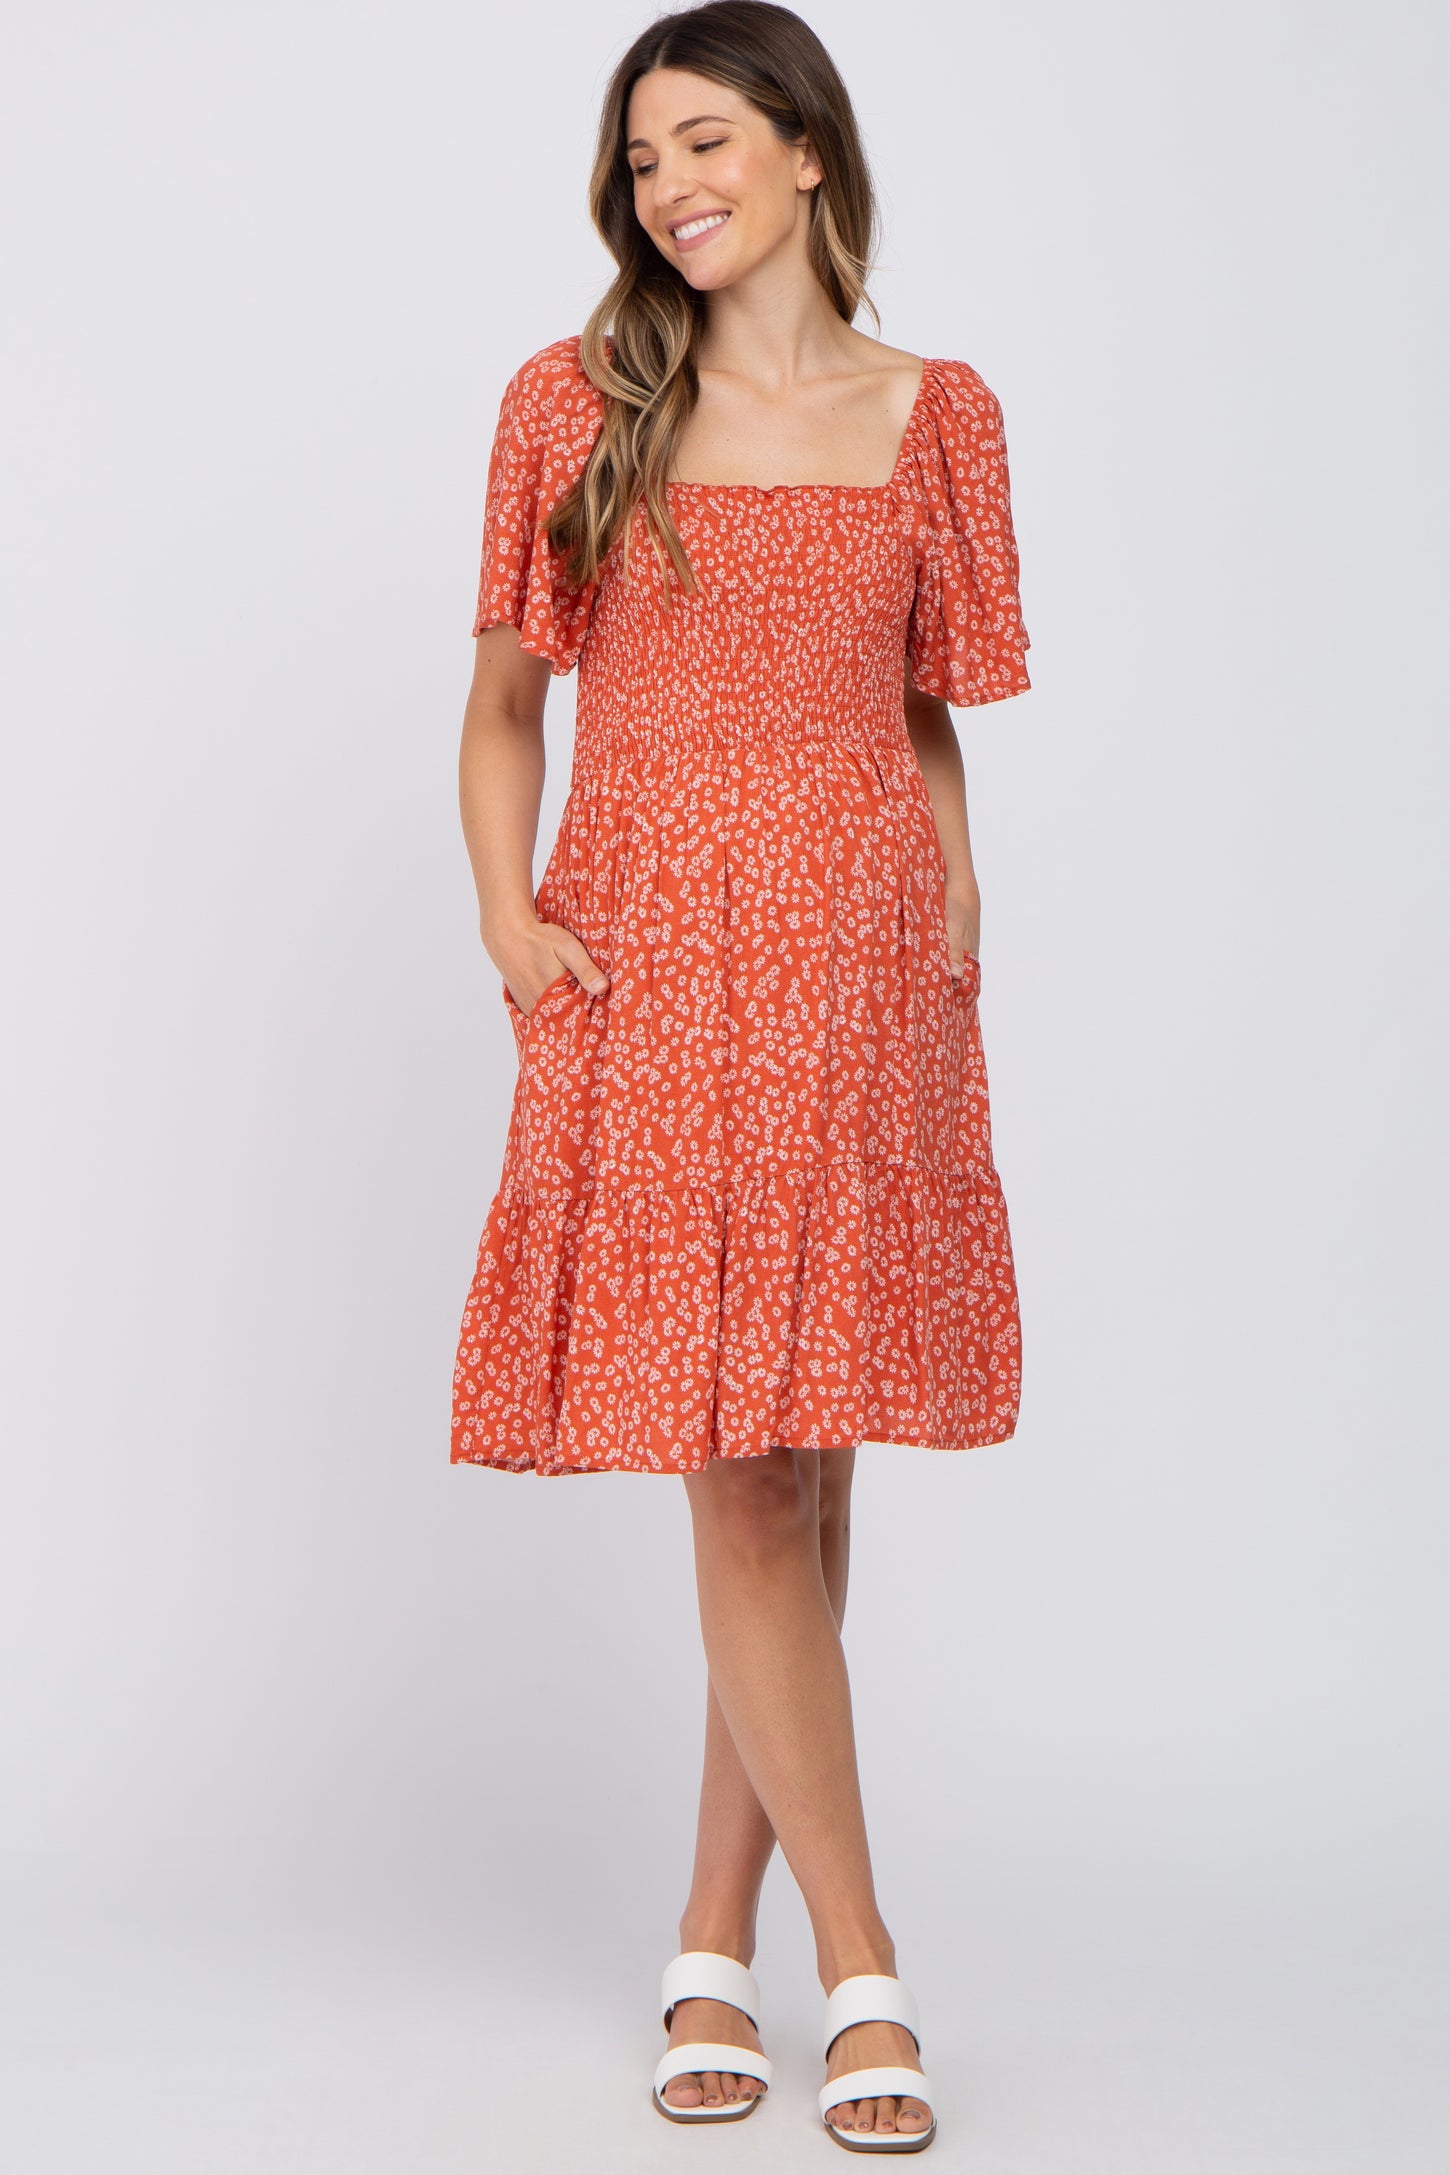 Coral Floral Smocked Maternity Dress